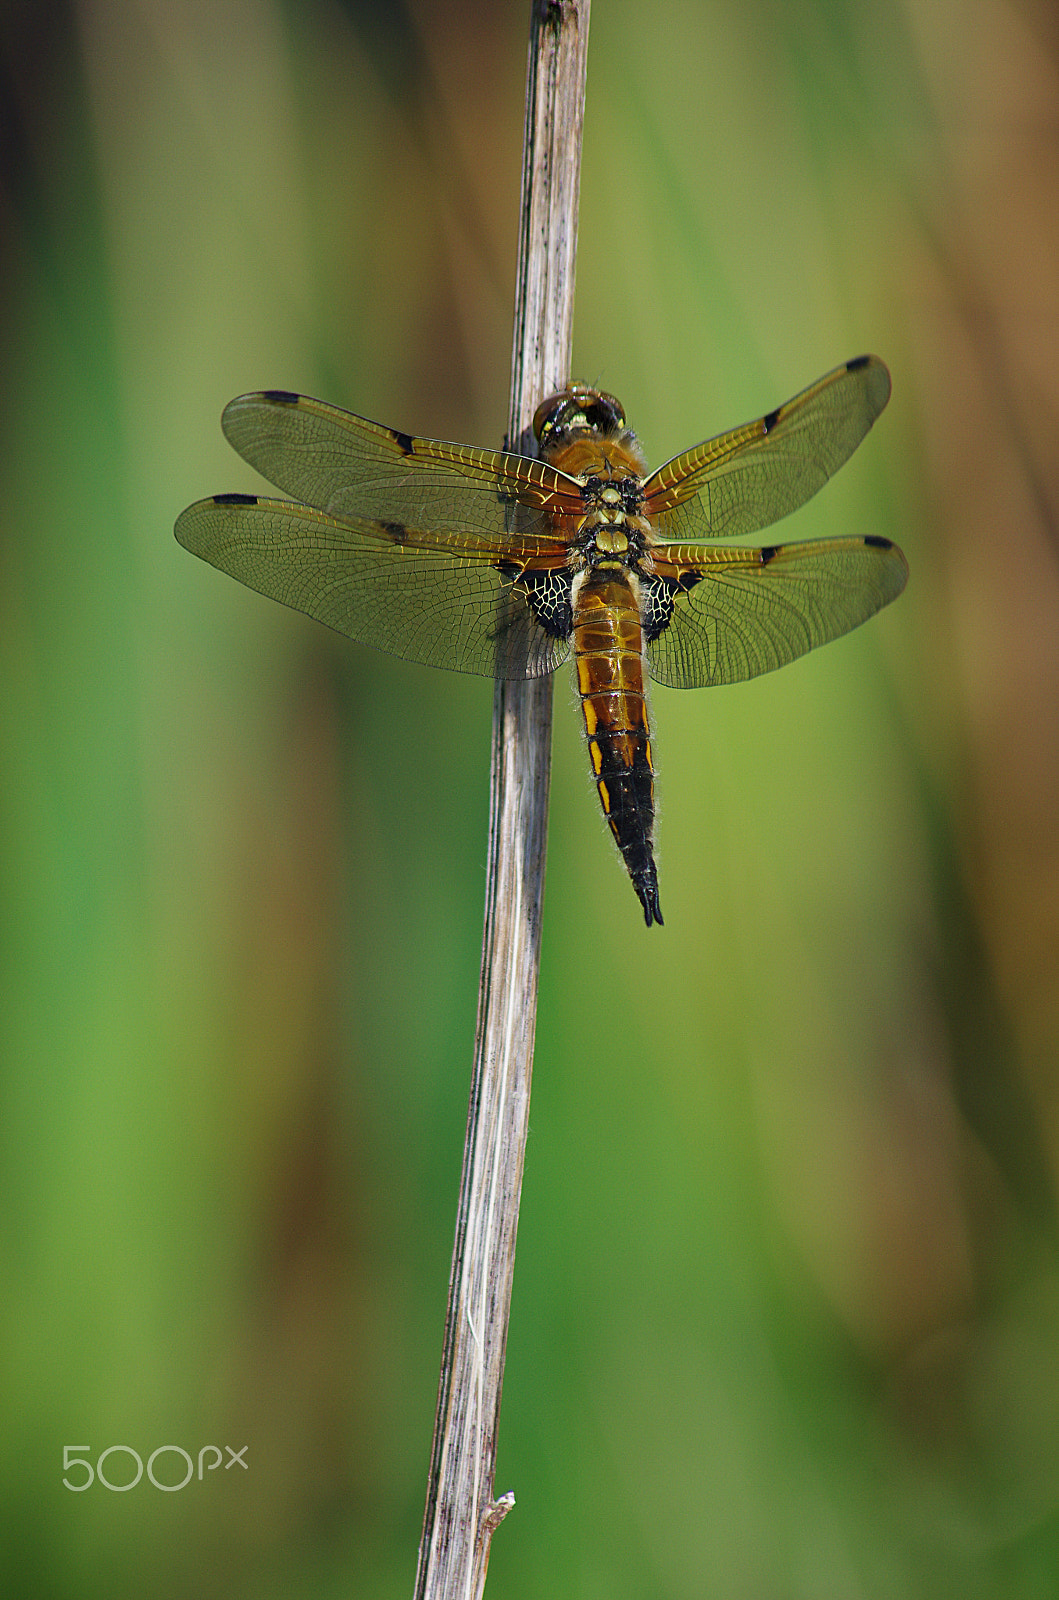 Pentax K-5 sample photo. Four spotted chaser dragonfly photography